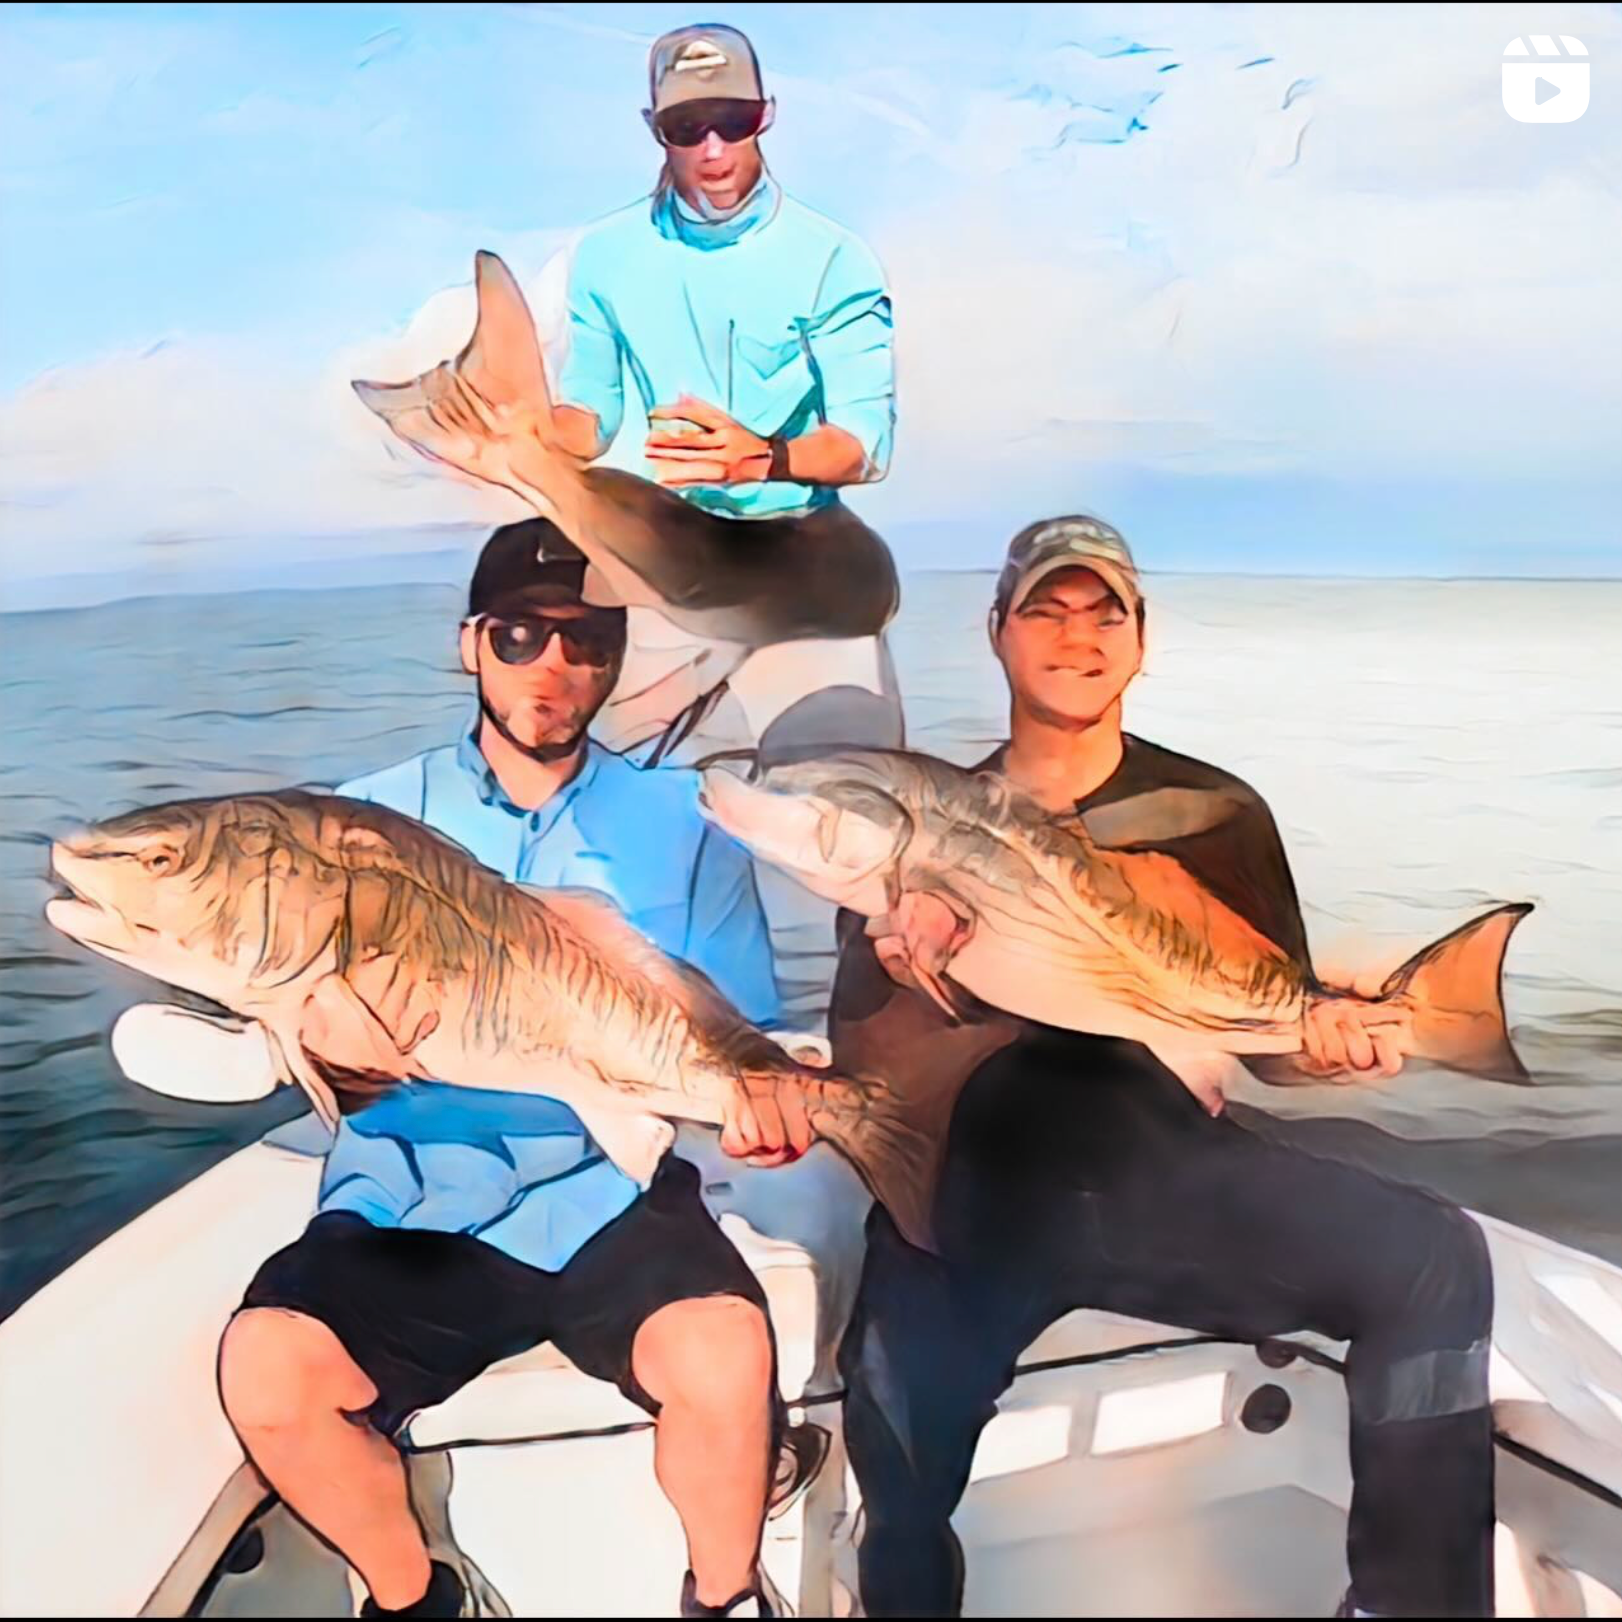 Lost count on catching these big bull reds. Some serious stoke was going on and the laughs at the end made the trip! 😂